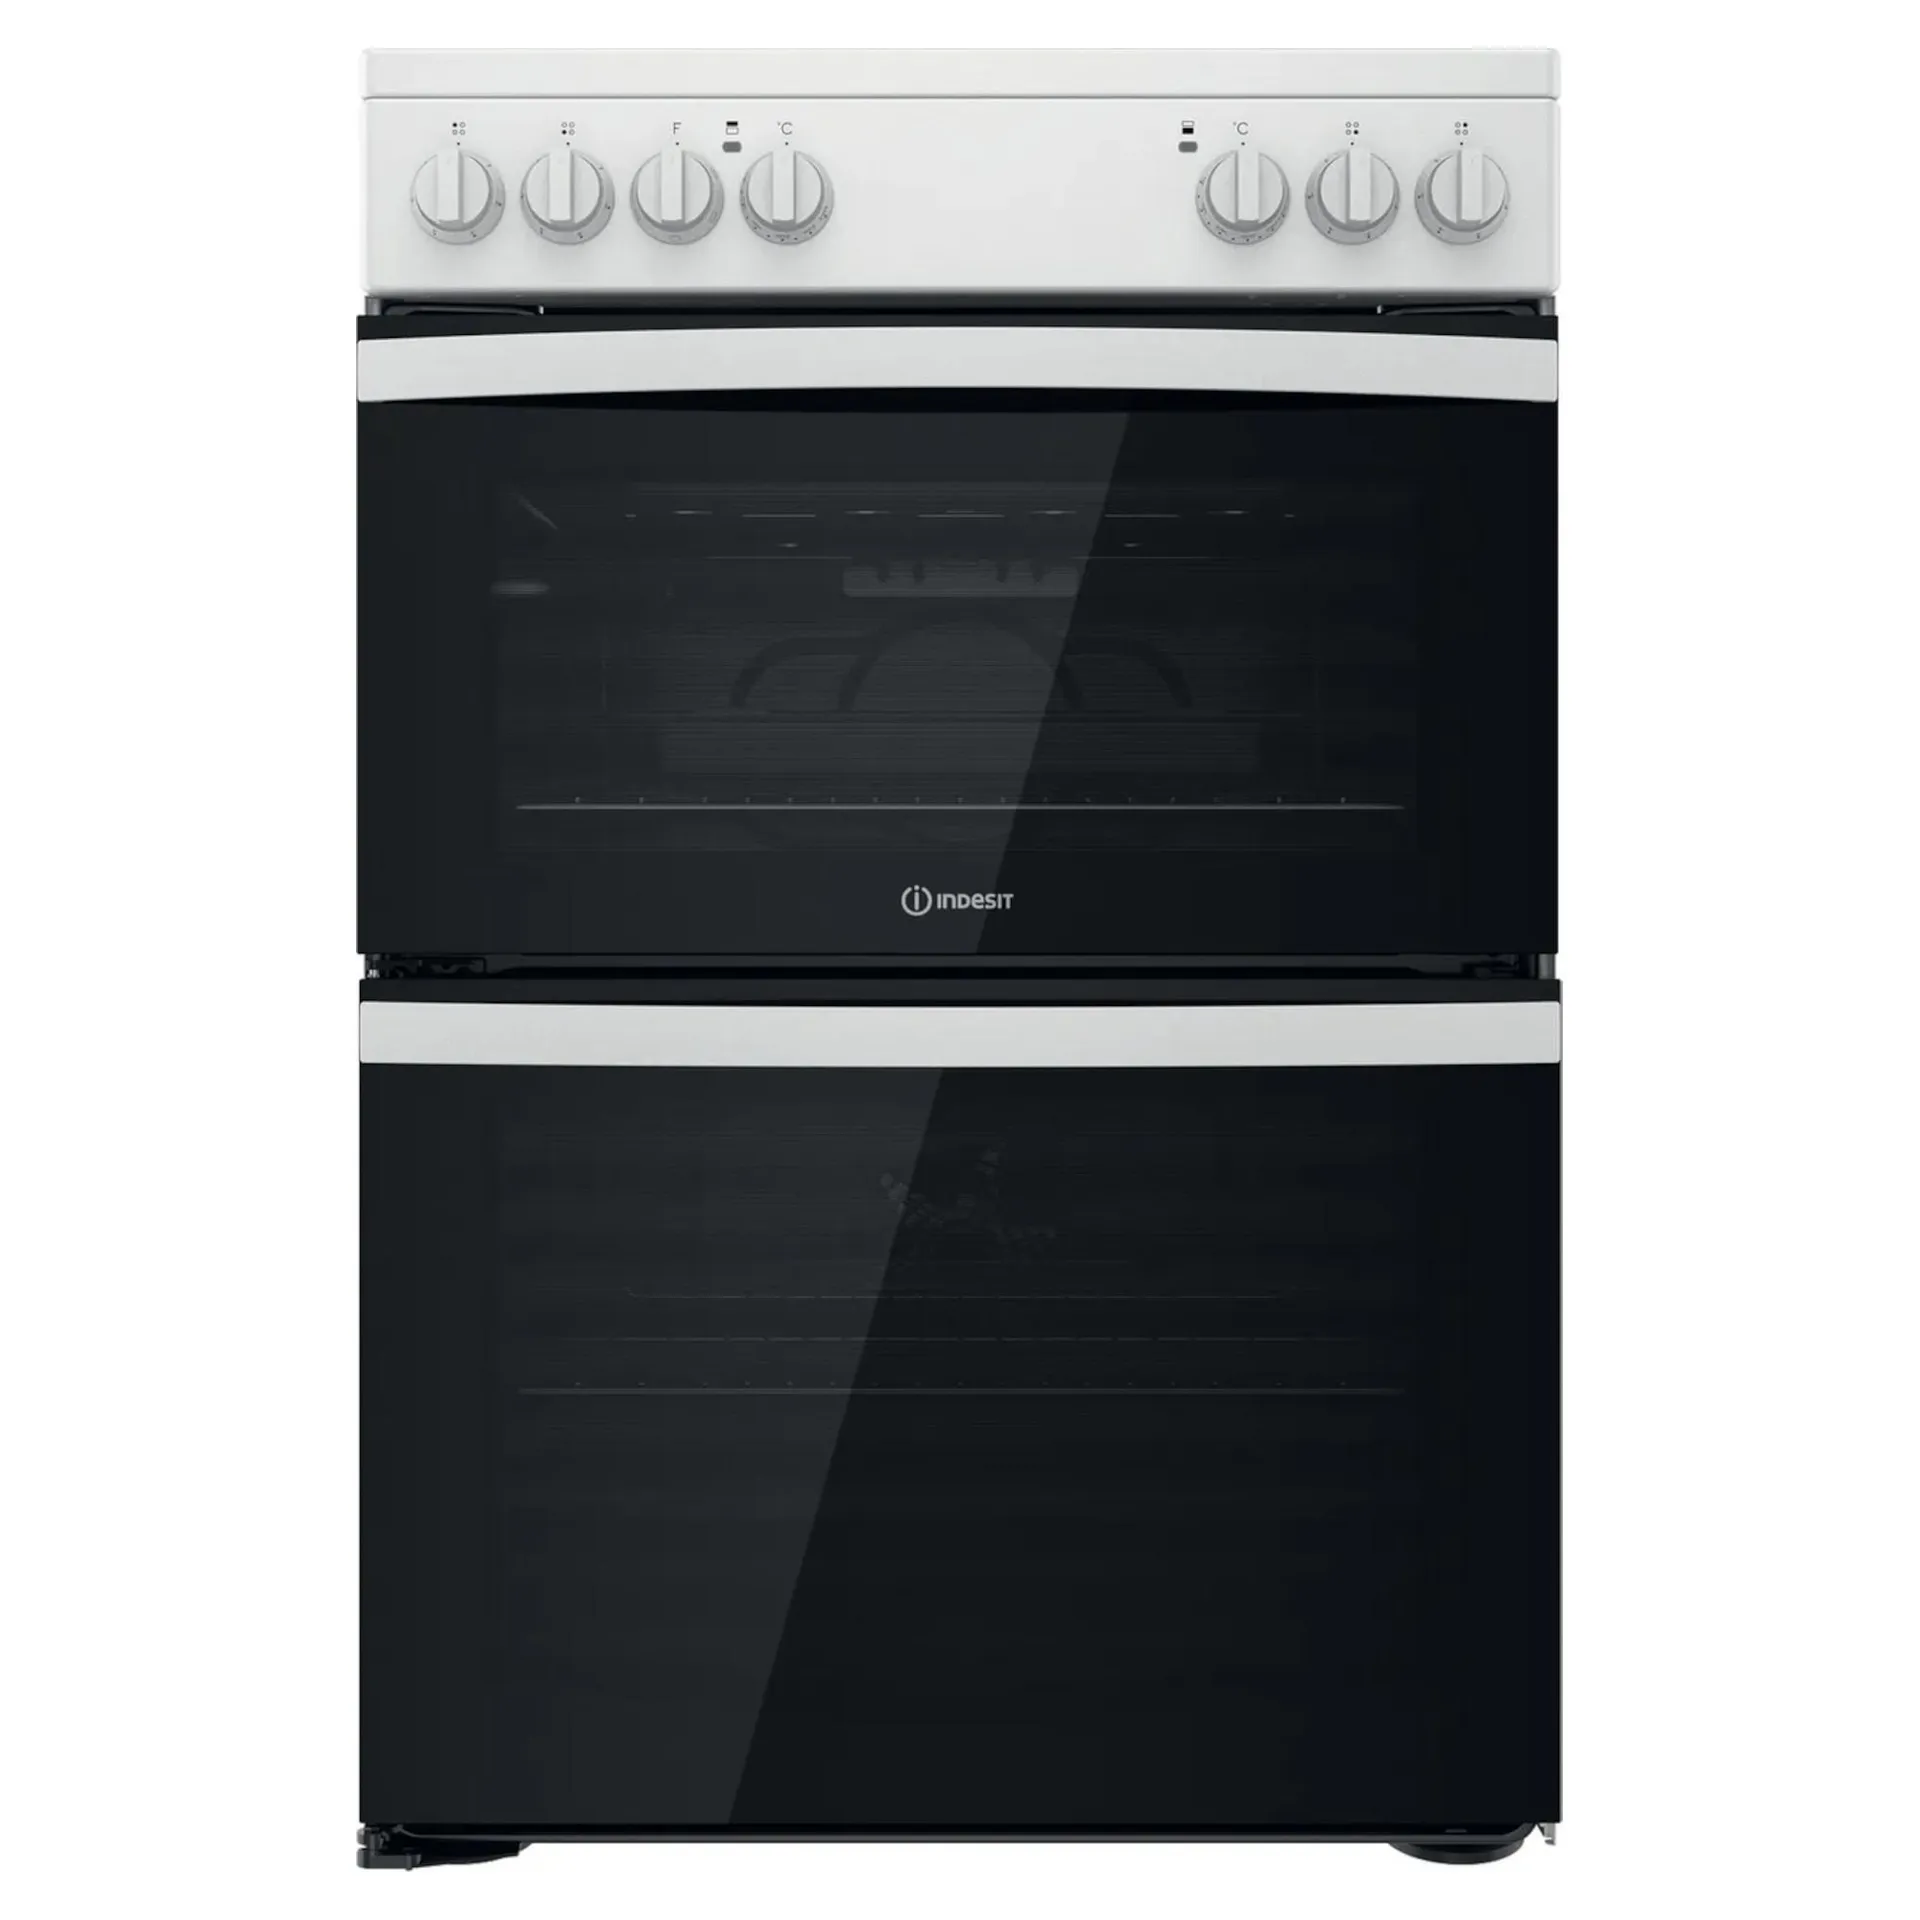 Indesit ID67V9KMWUK Electric Cooker with Ceramic Hob